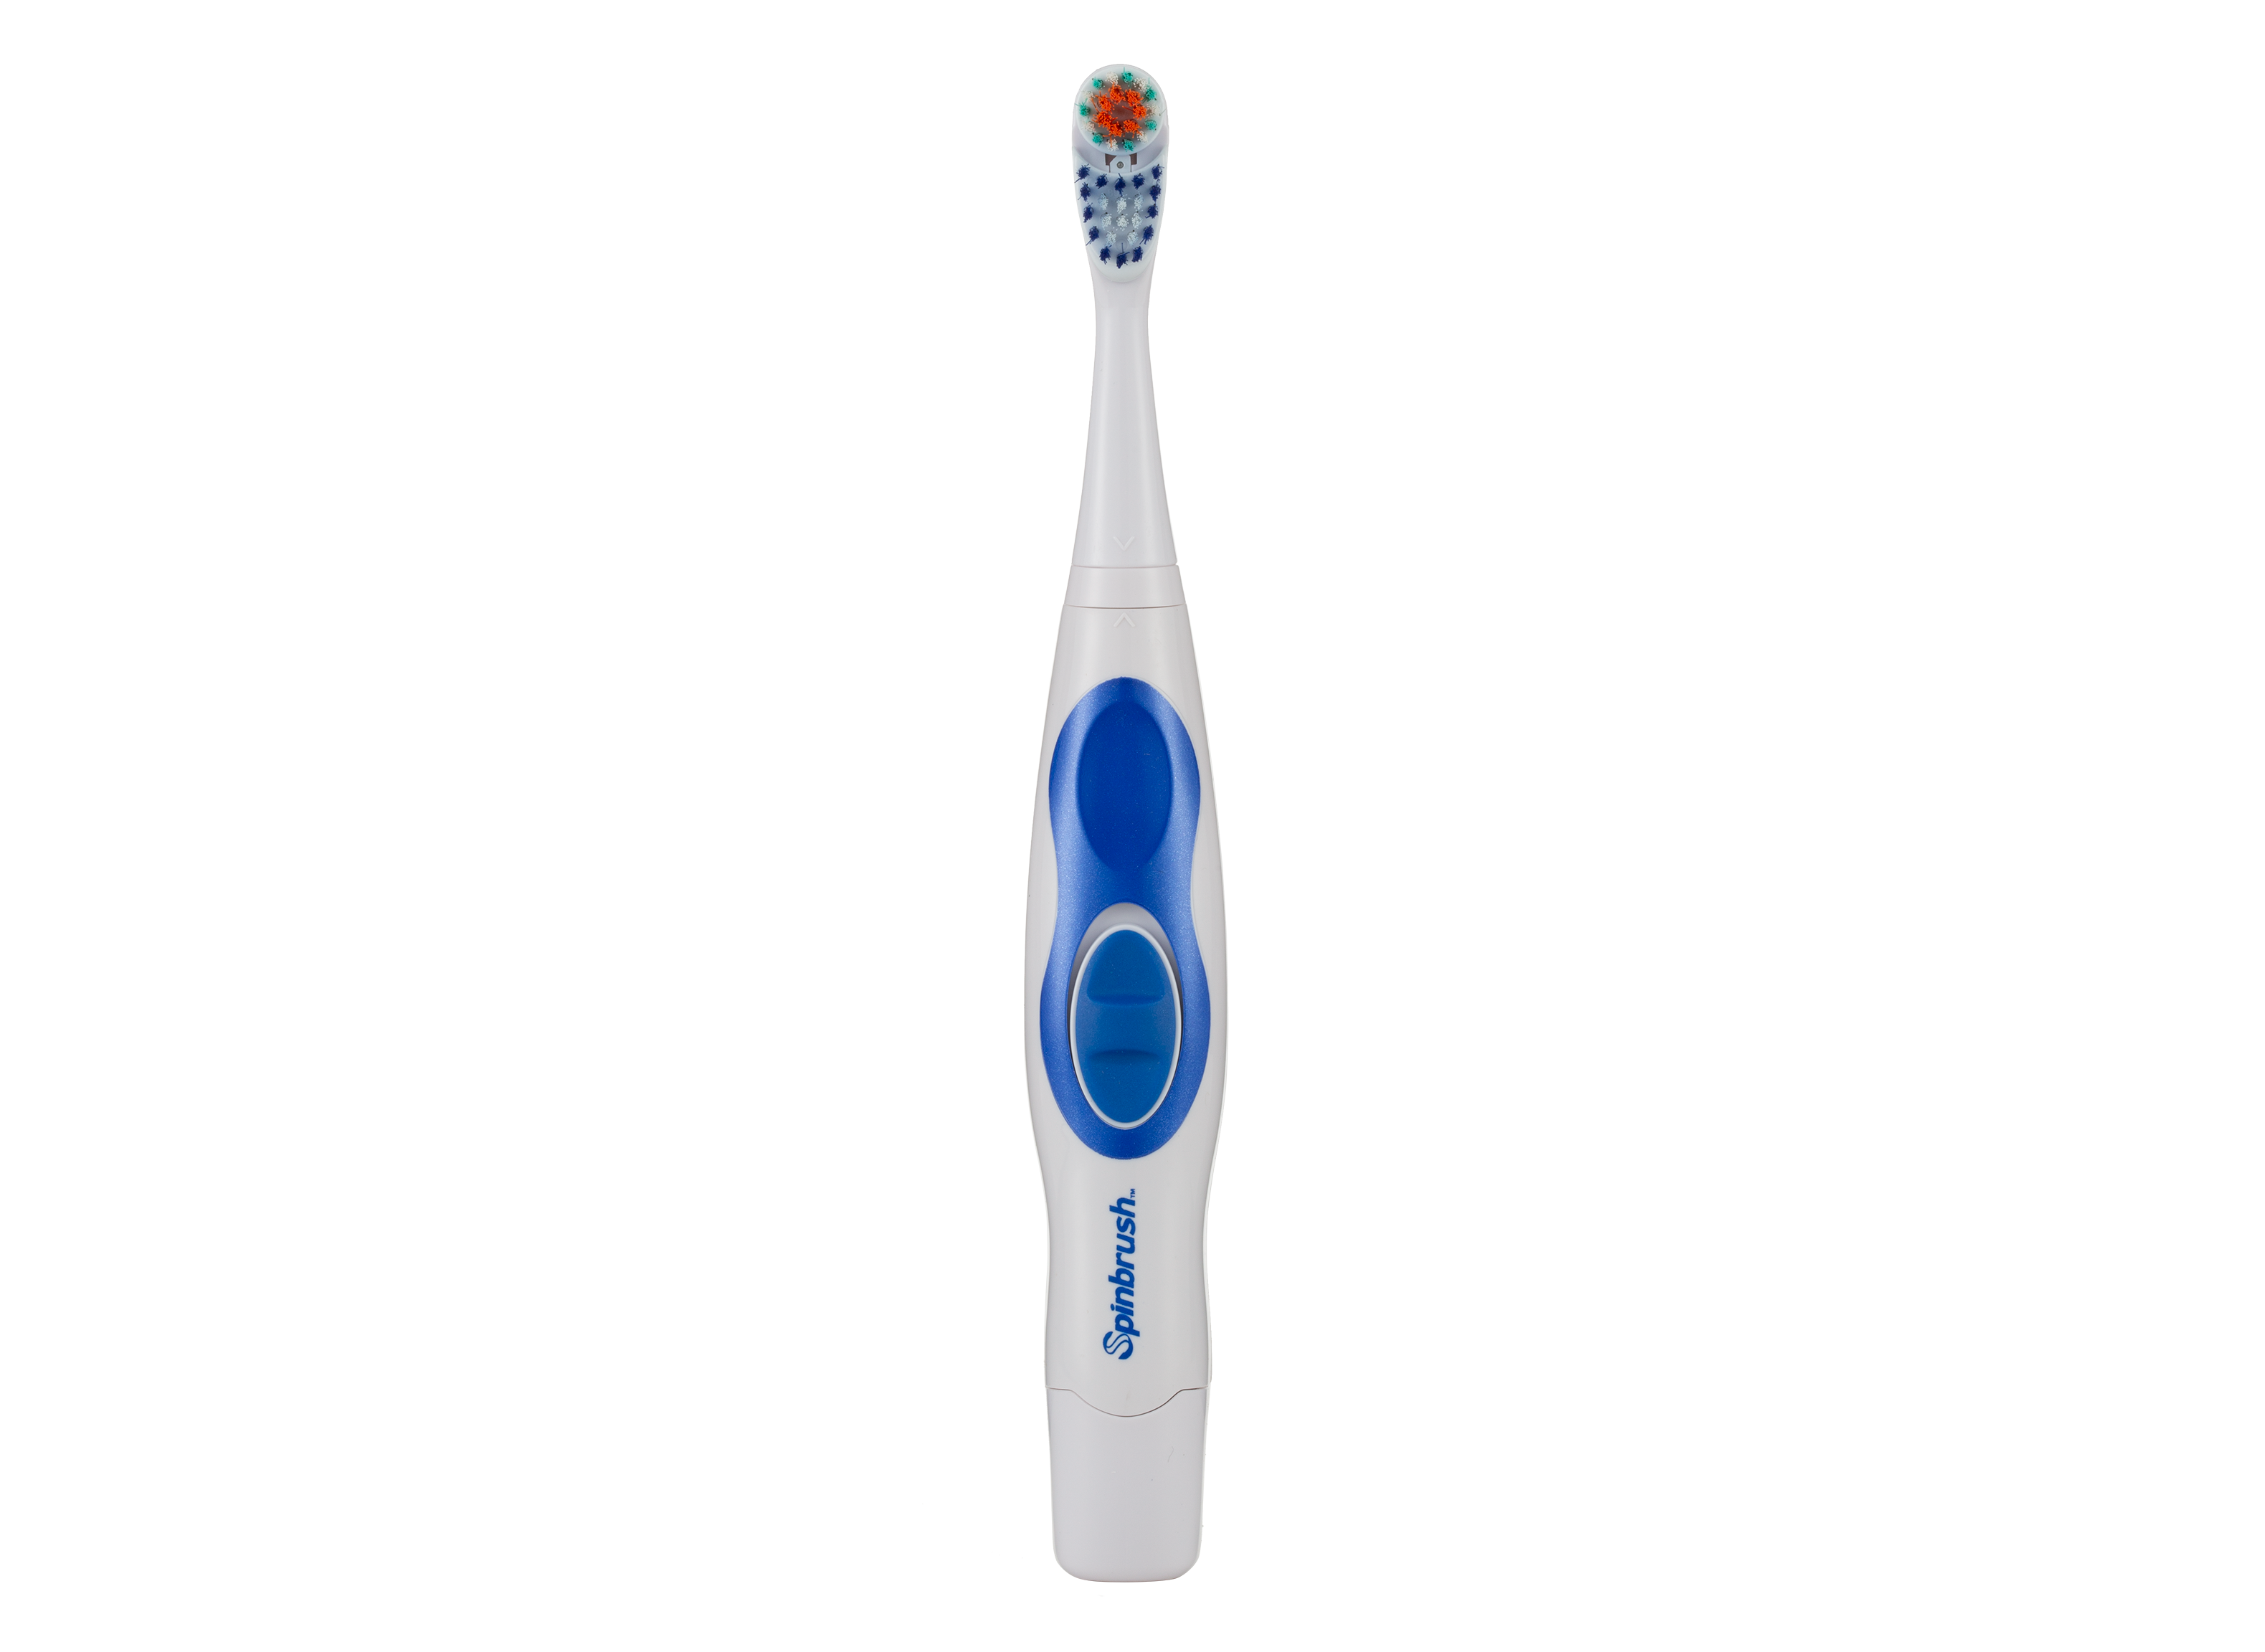 https://crdms.images.consumerreports.org/prod/products/cr/models/400529-electric-toothbrushes-arm-hammer-spinbrush-pro-extra-white-soft-10014355.png